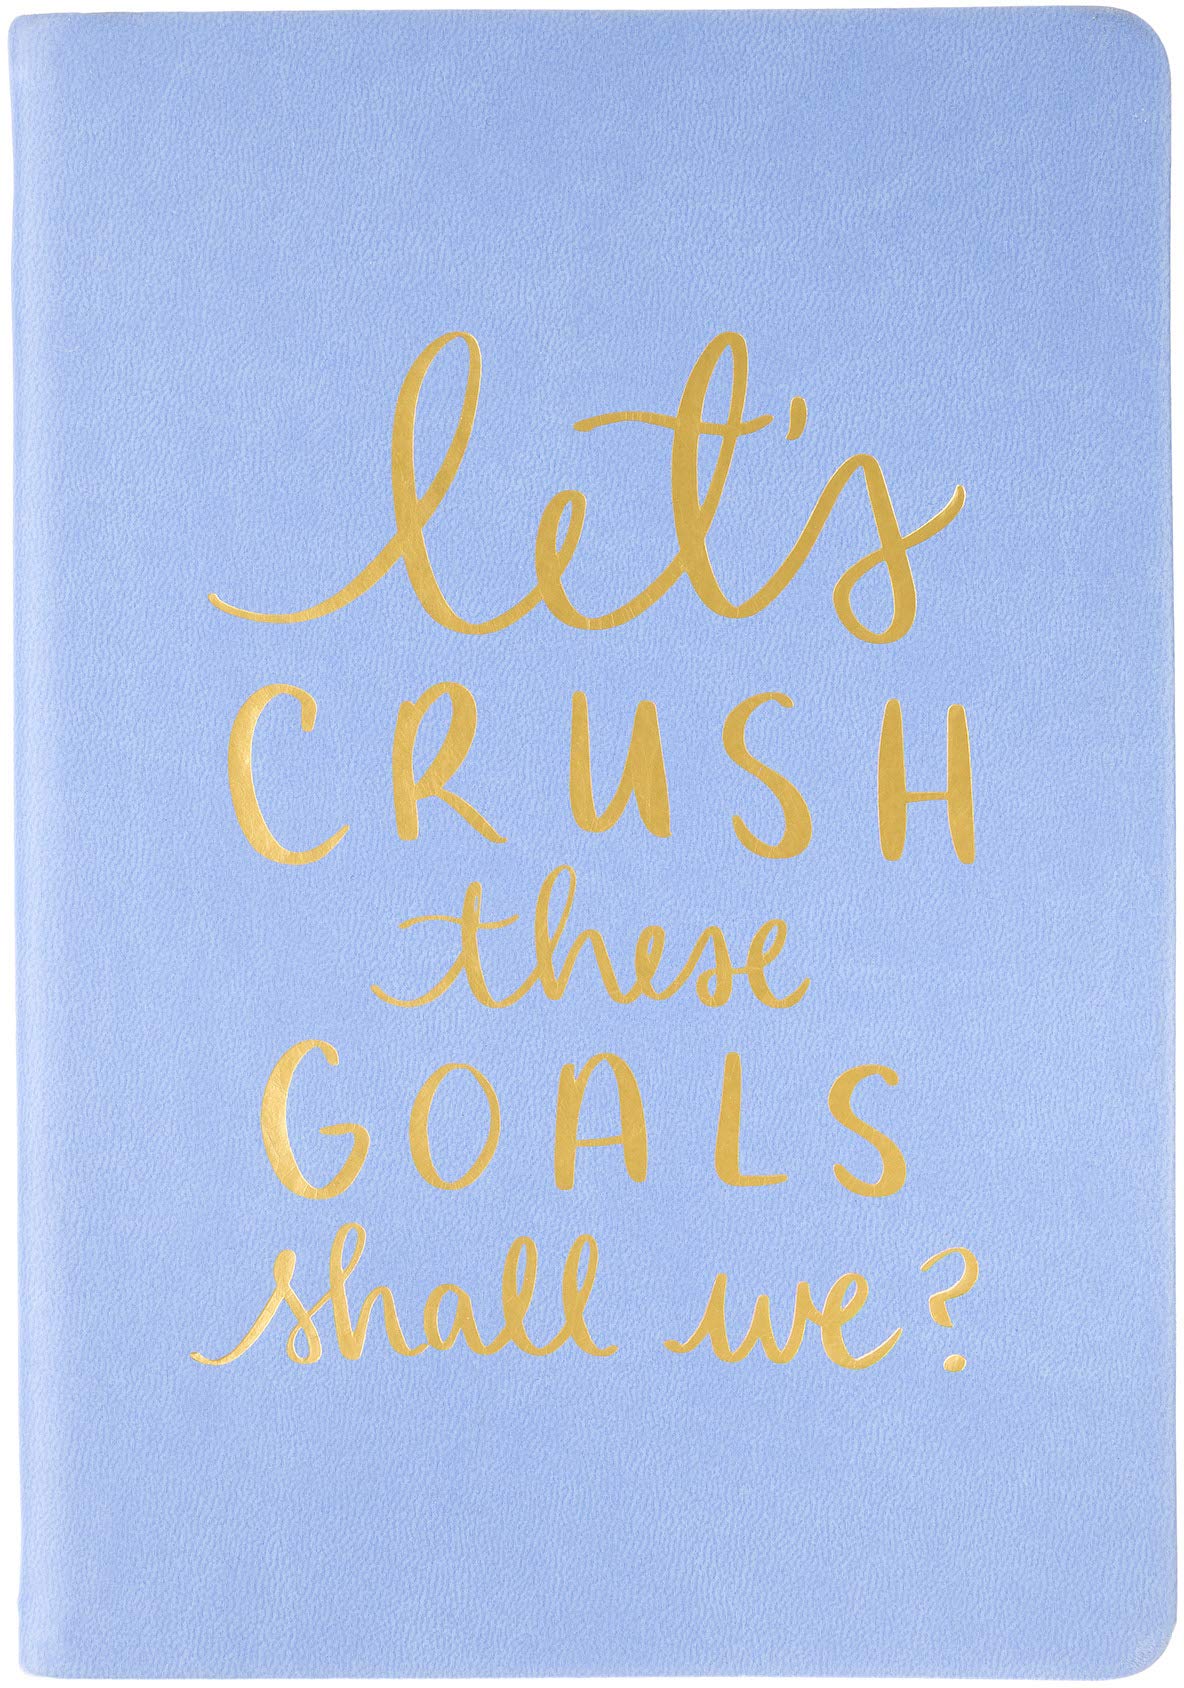 let's CRUSH these GOALS shall we? | Journal